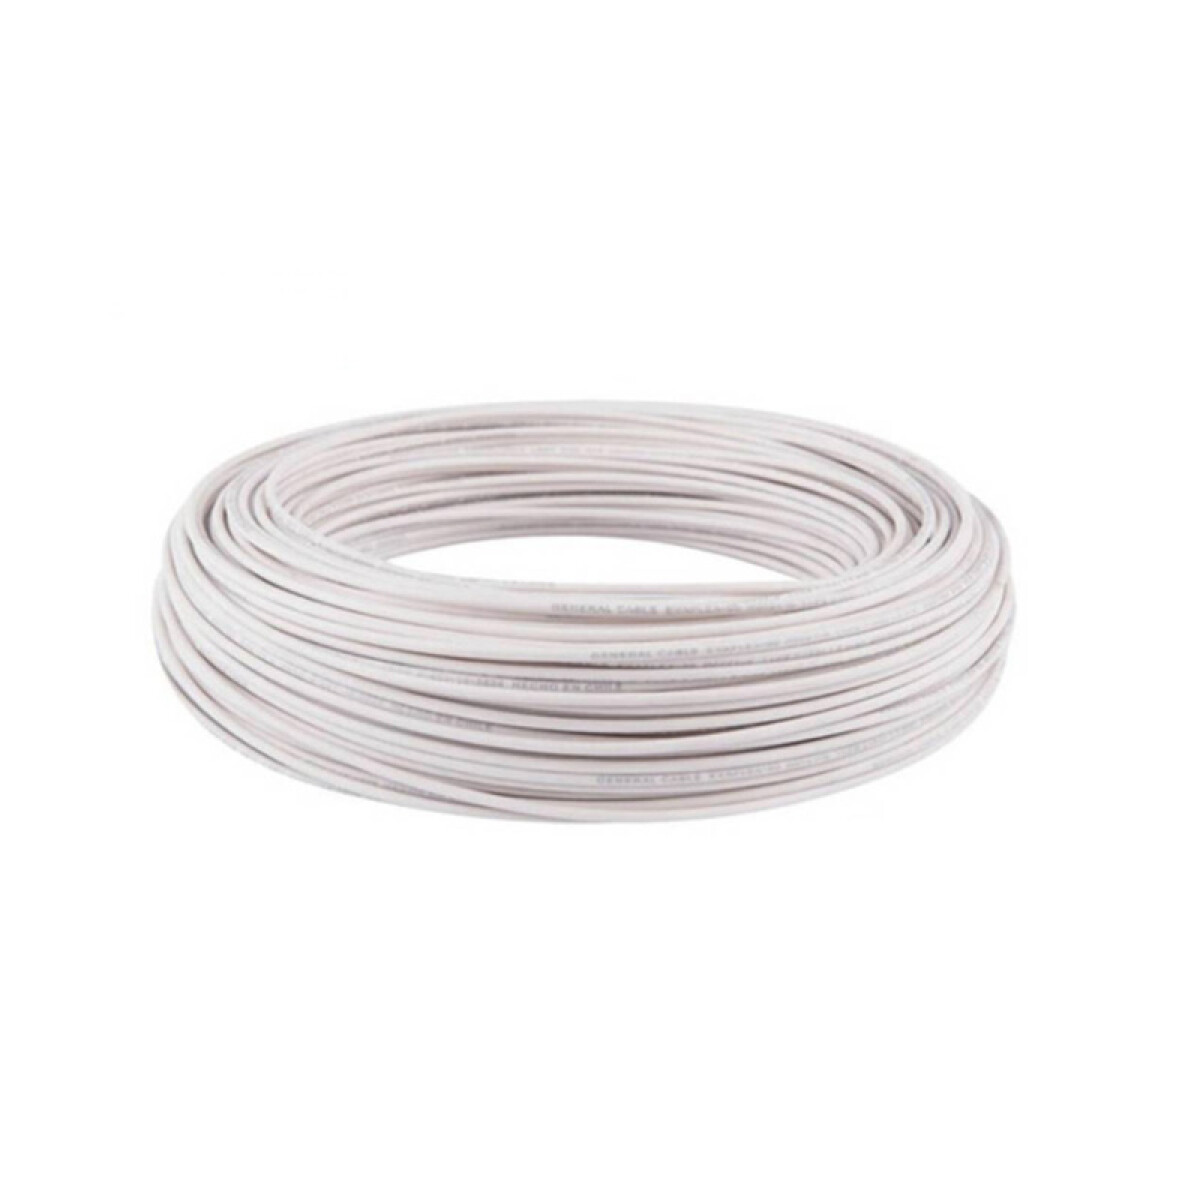 Cable Multifilar Ufex 1mm Blanco 